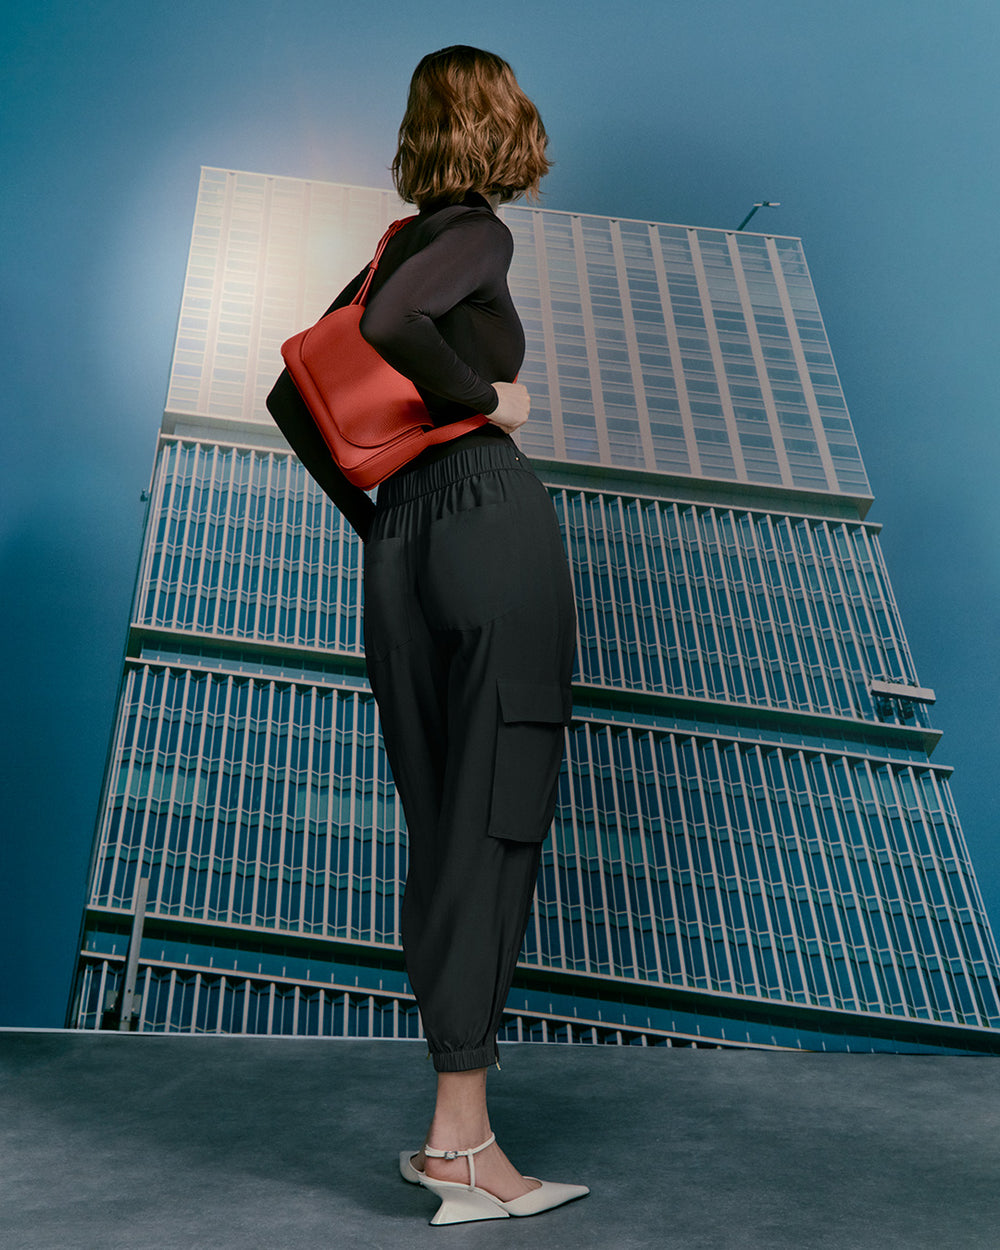 Woman facing a large building, carrying a backpack, viewed from the side.